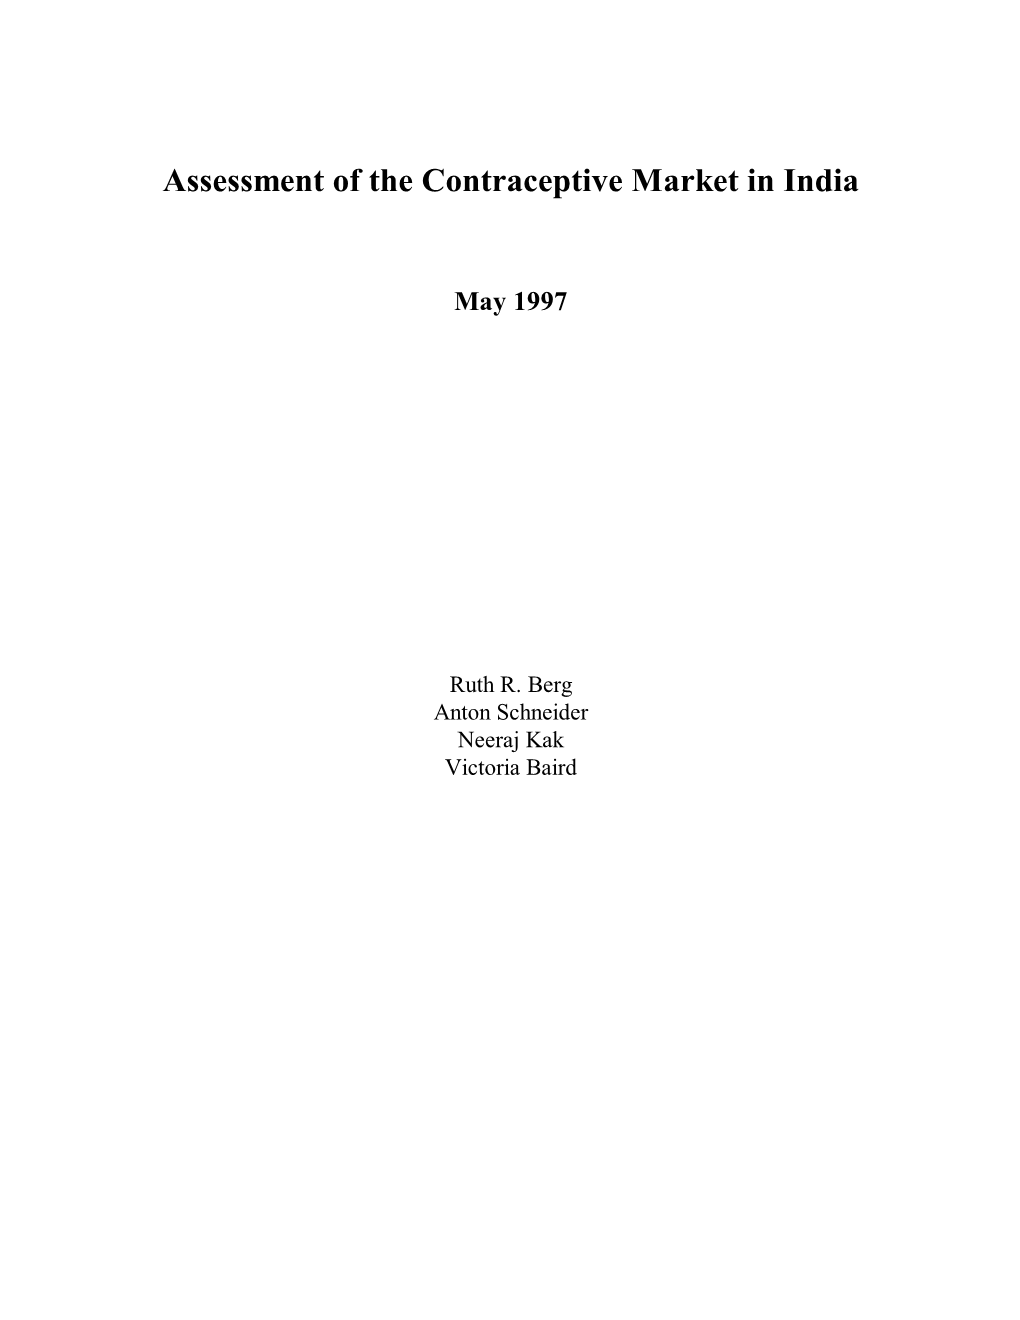 Assessment of the Contraceptive Market in India